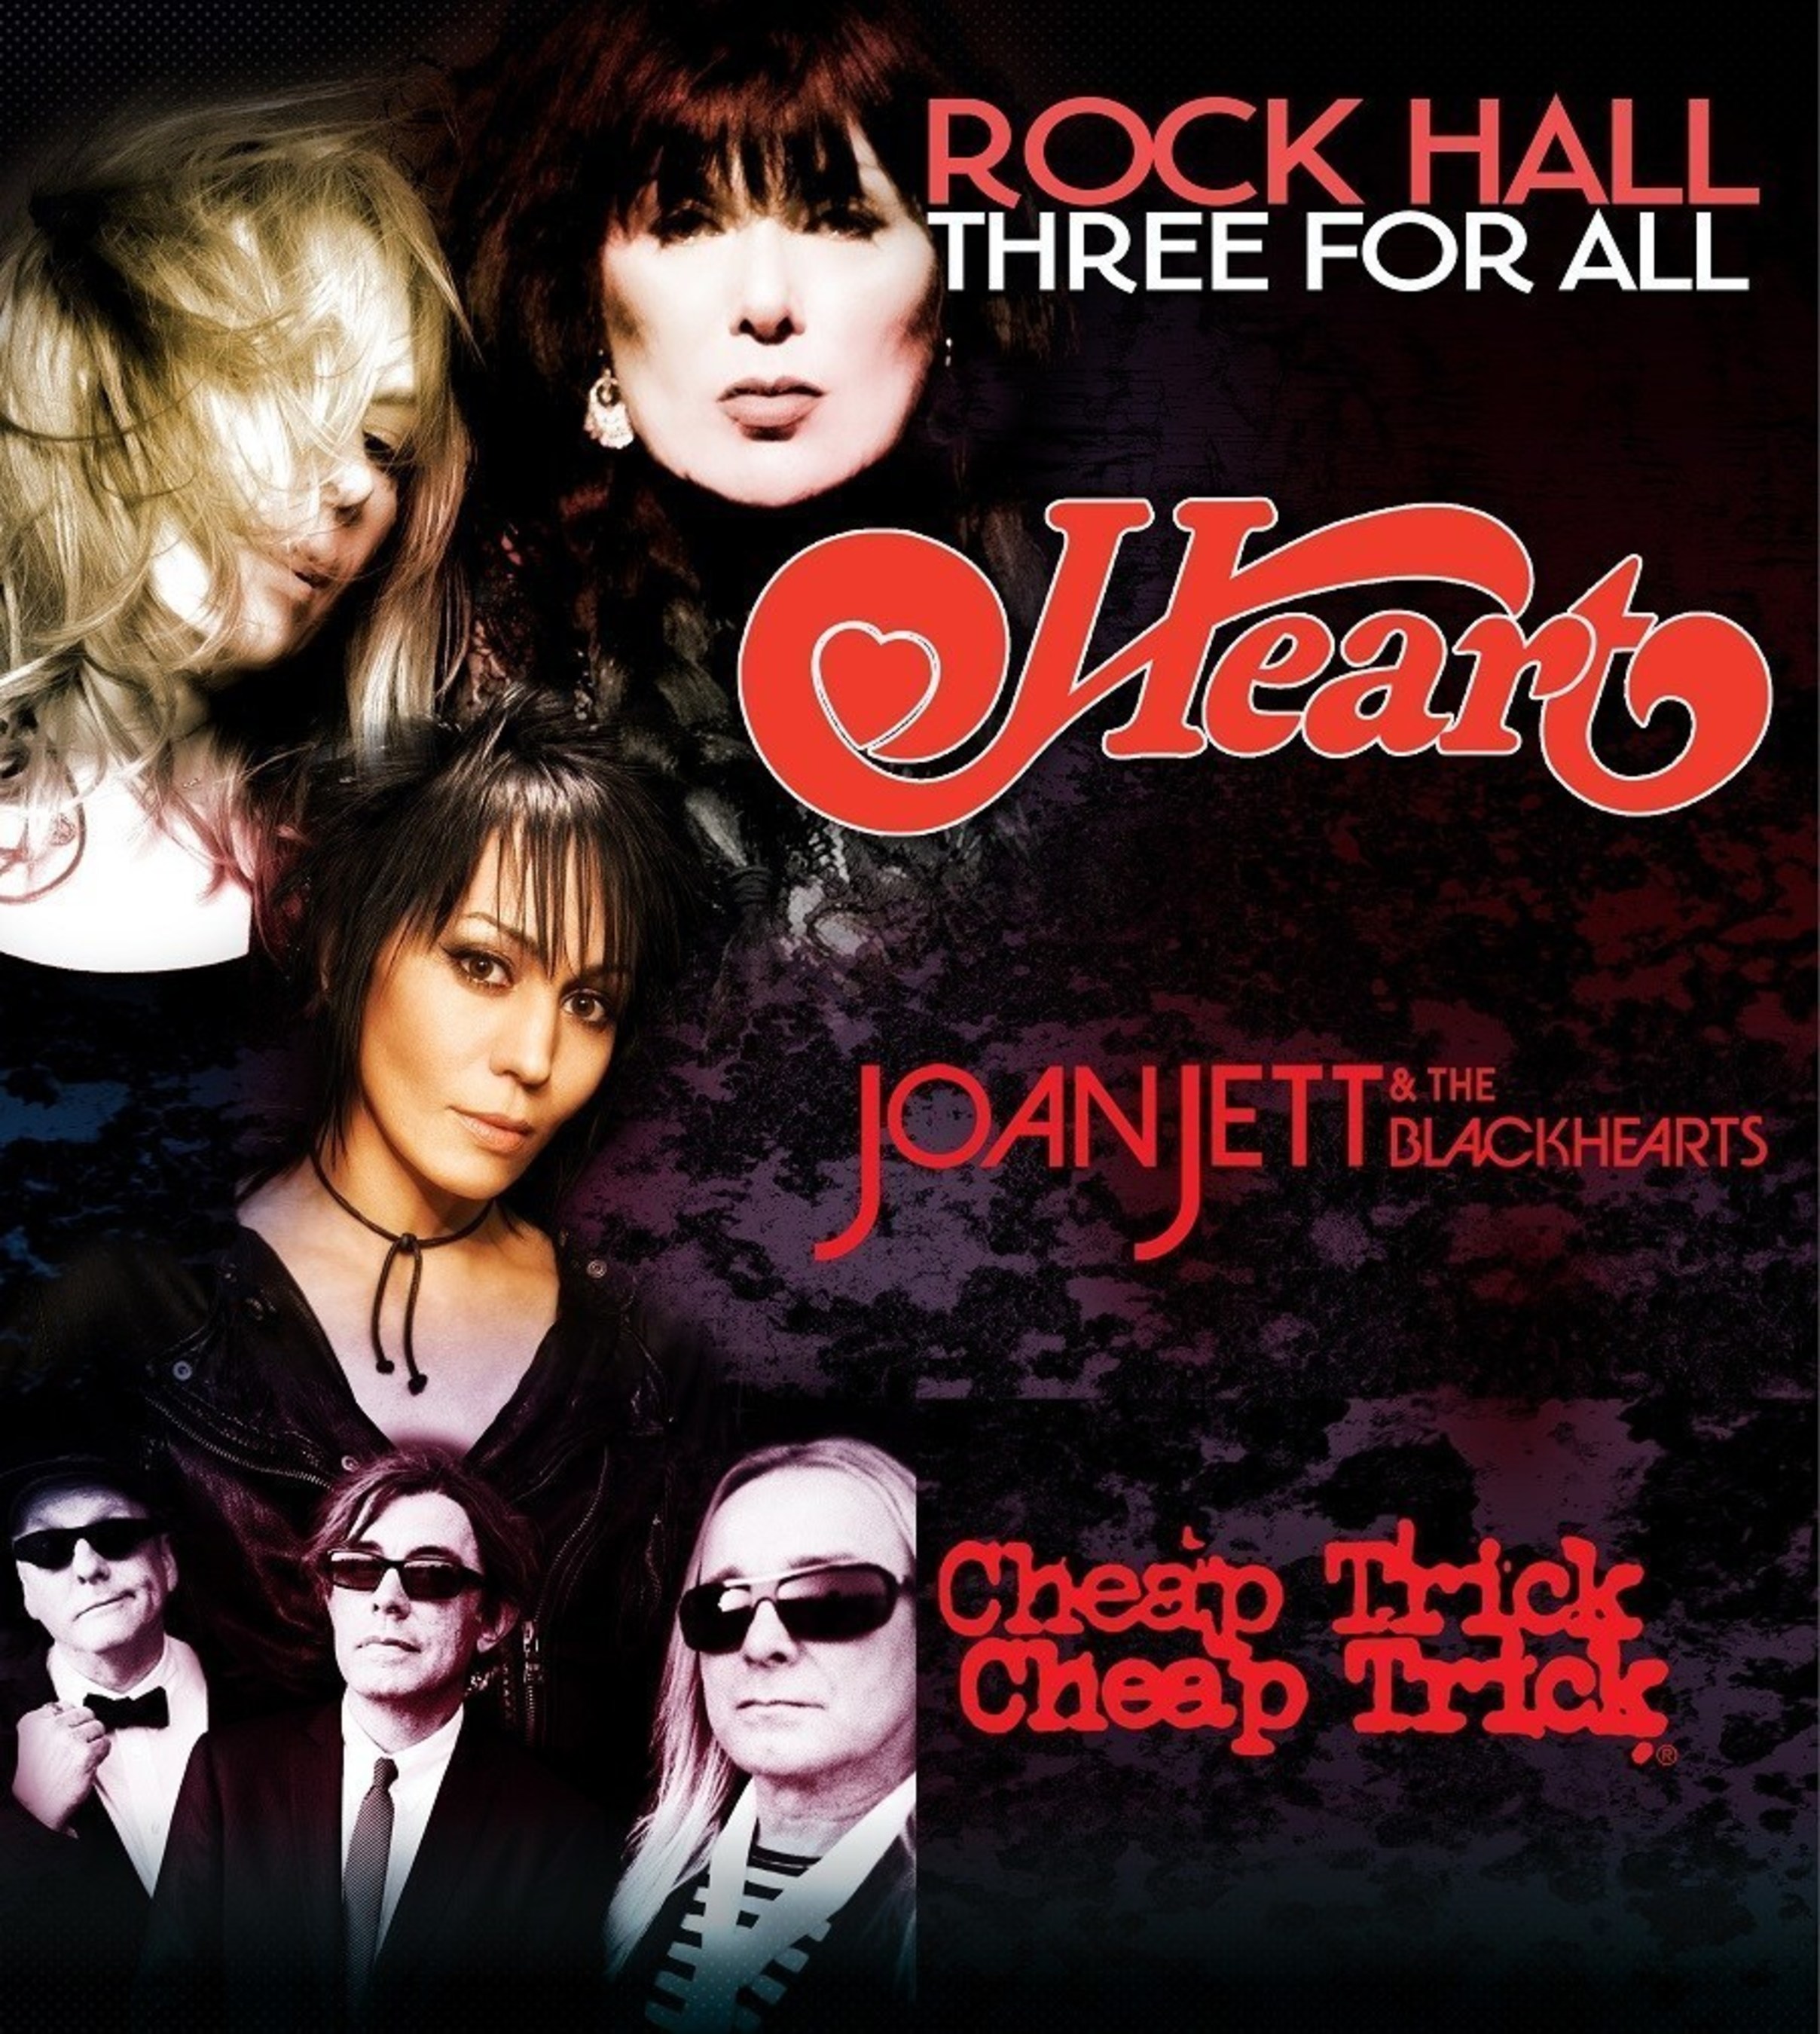 HEART, JOAN JETT & THE BLACKHEARTS AND CHEAP TRICK TO TOUR SUMMER 2016 ON ROCK HALL THREE FOR ALL TOUR